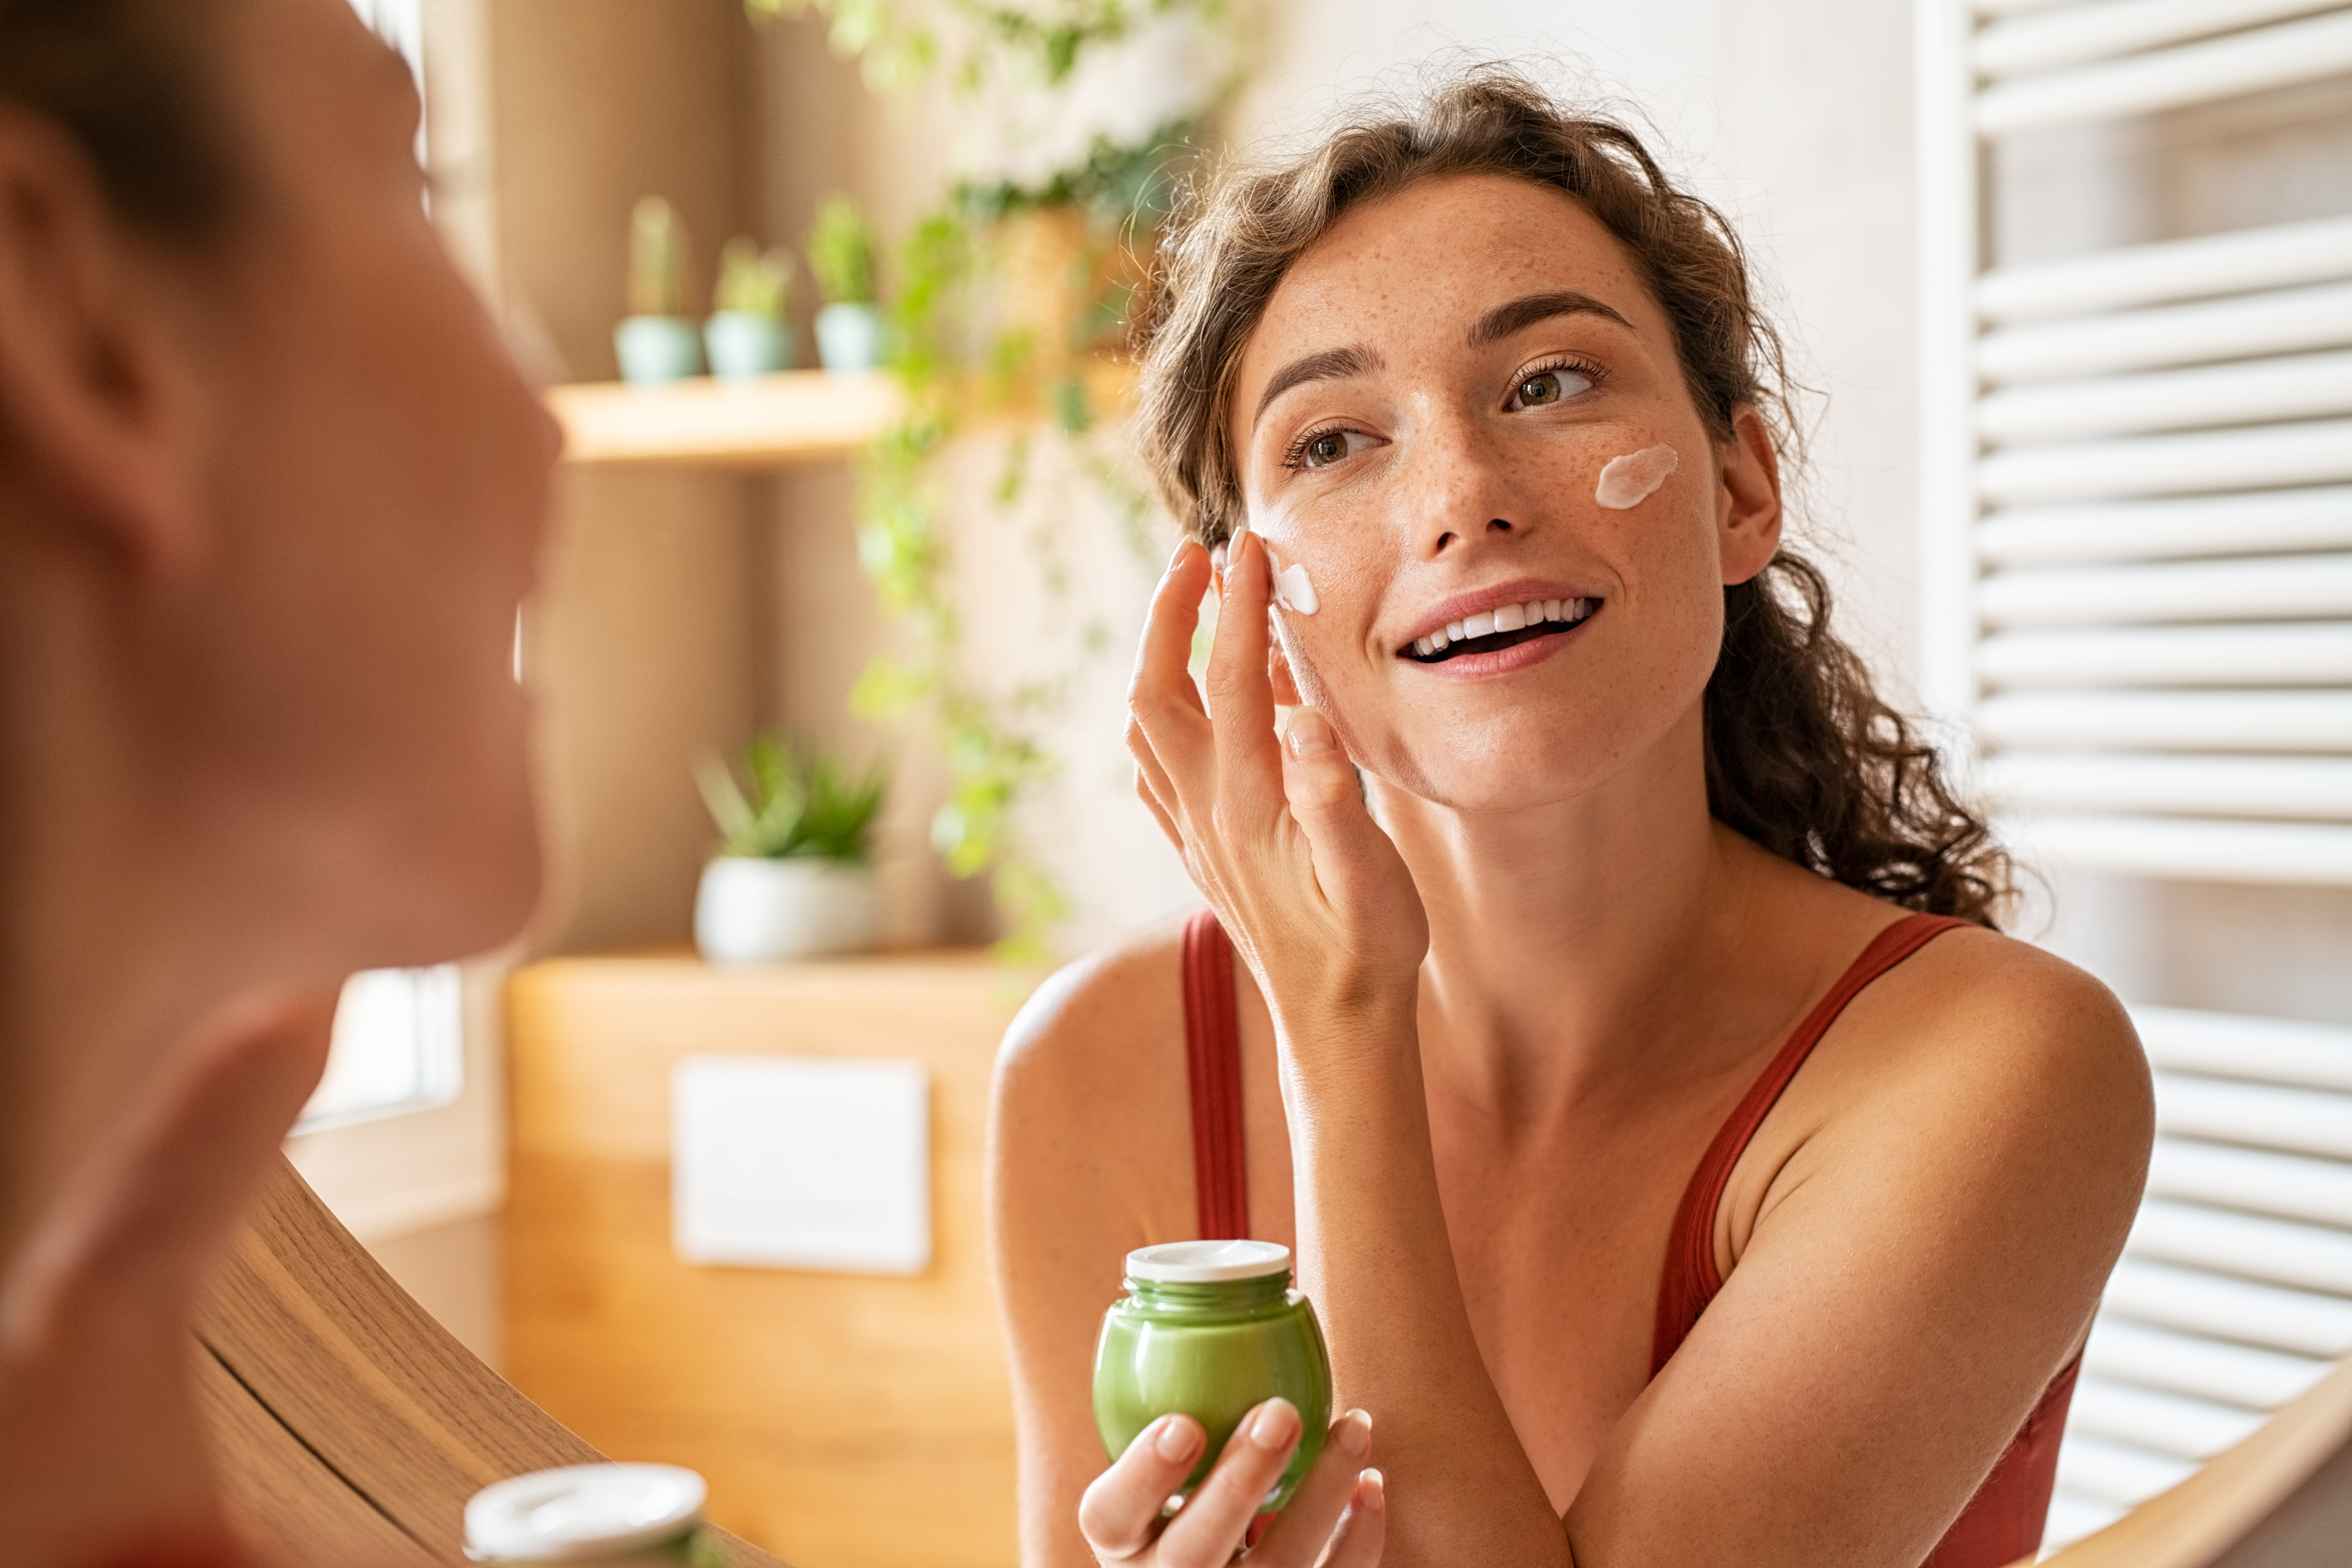 A woman in a bathroom applies cream to her face, holding a green jar, smiling at her reflection in the mirror